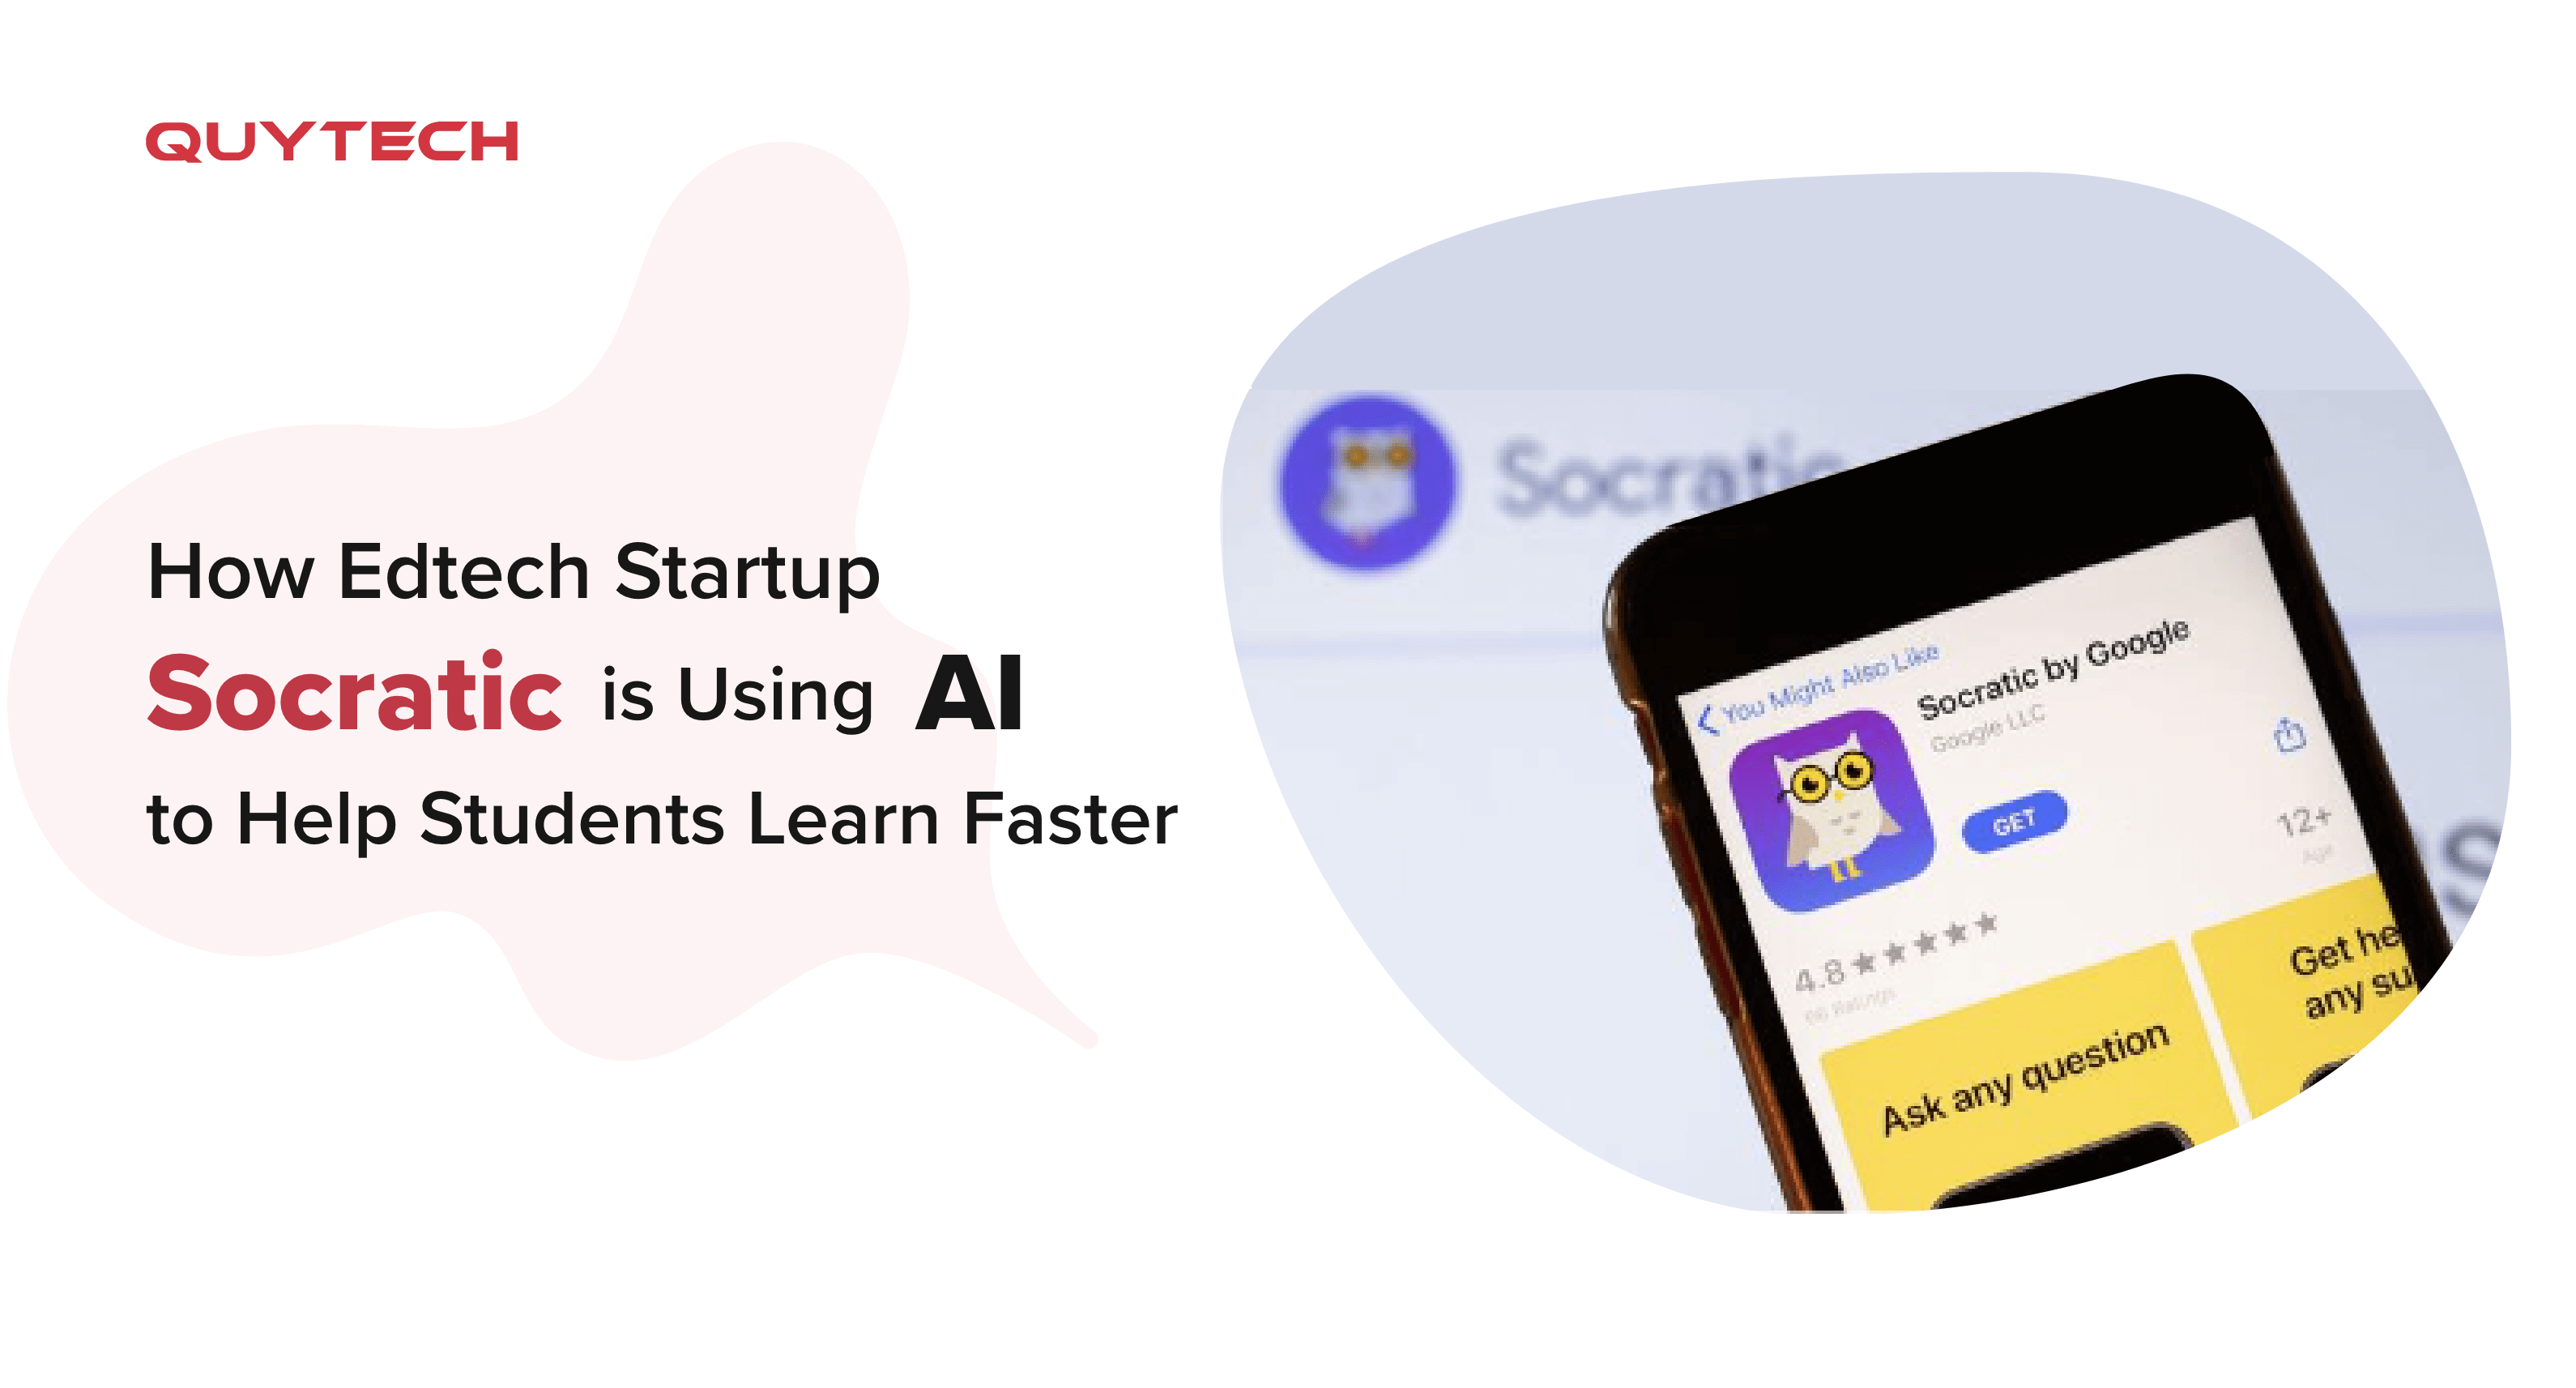 How-Edtech-Startup-Socratic-is-Using-AI-to-Help-Students-Learn-Faster